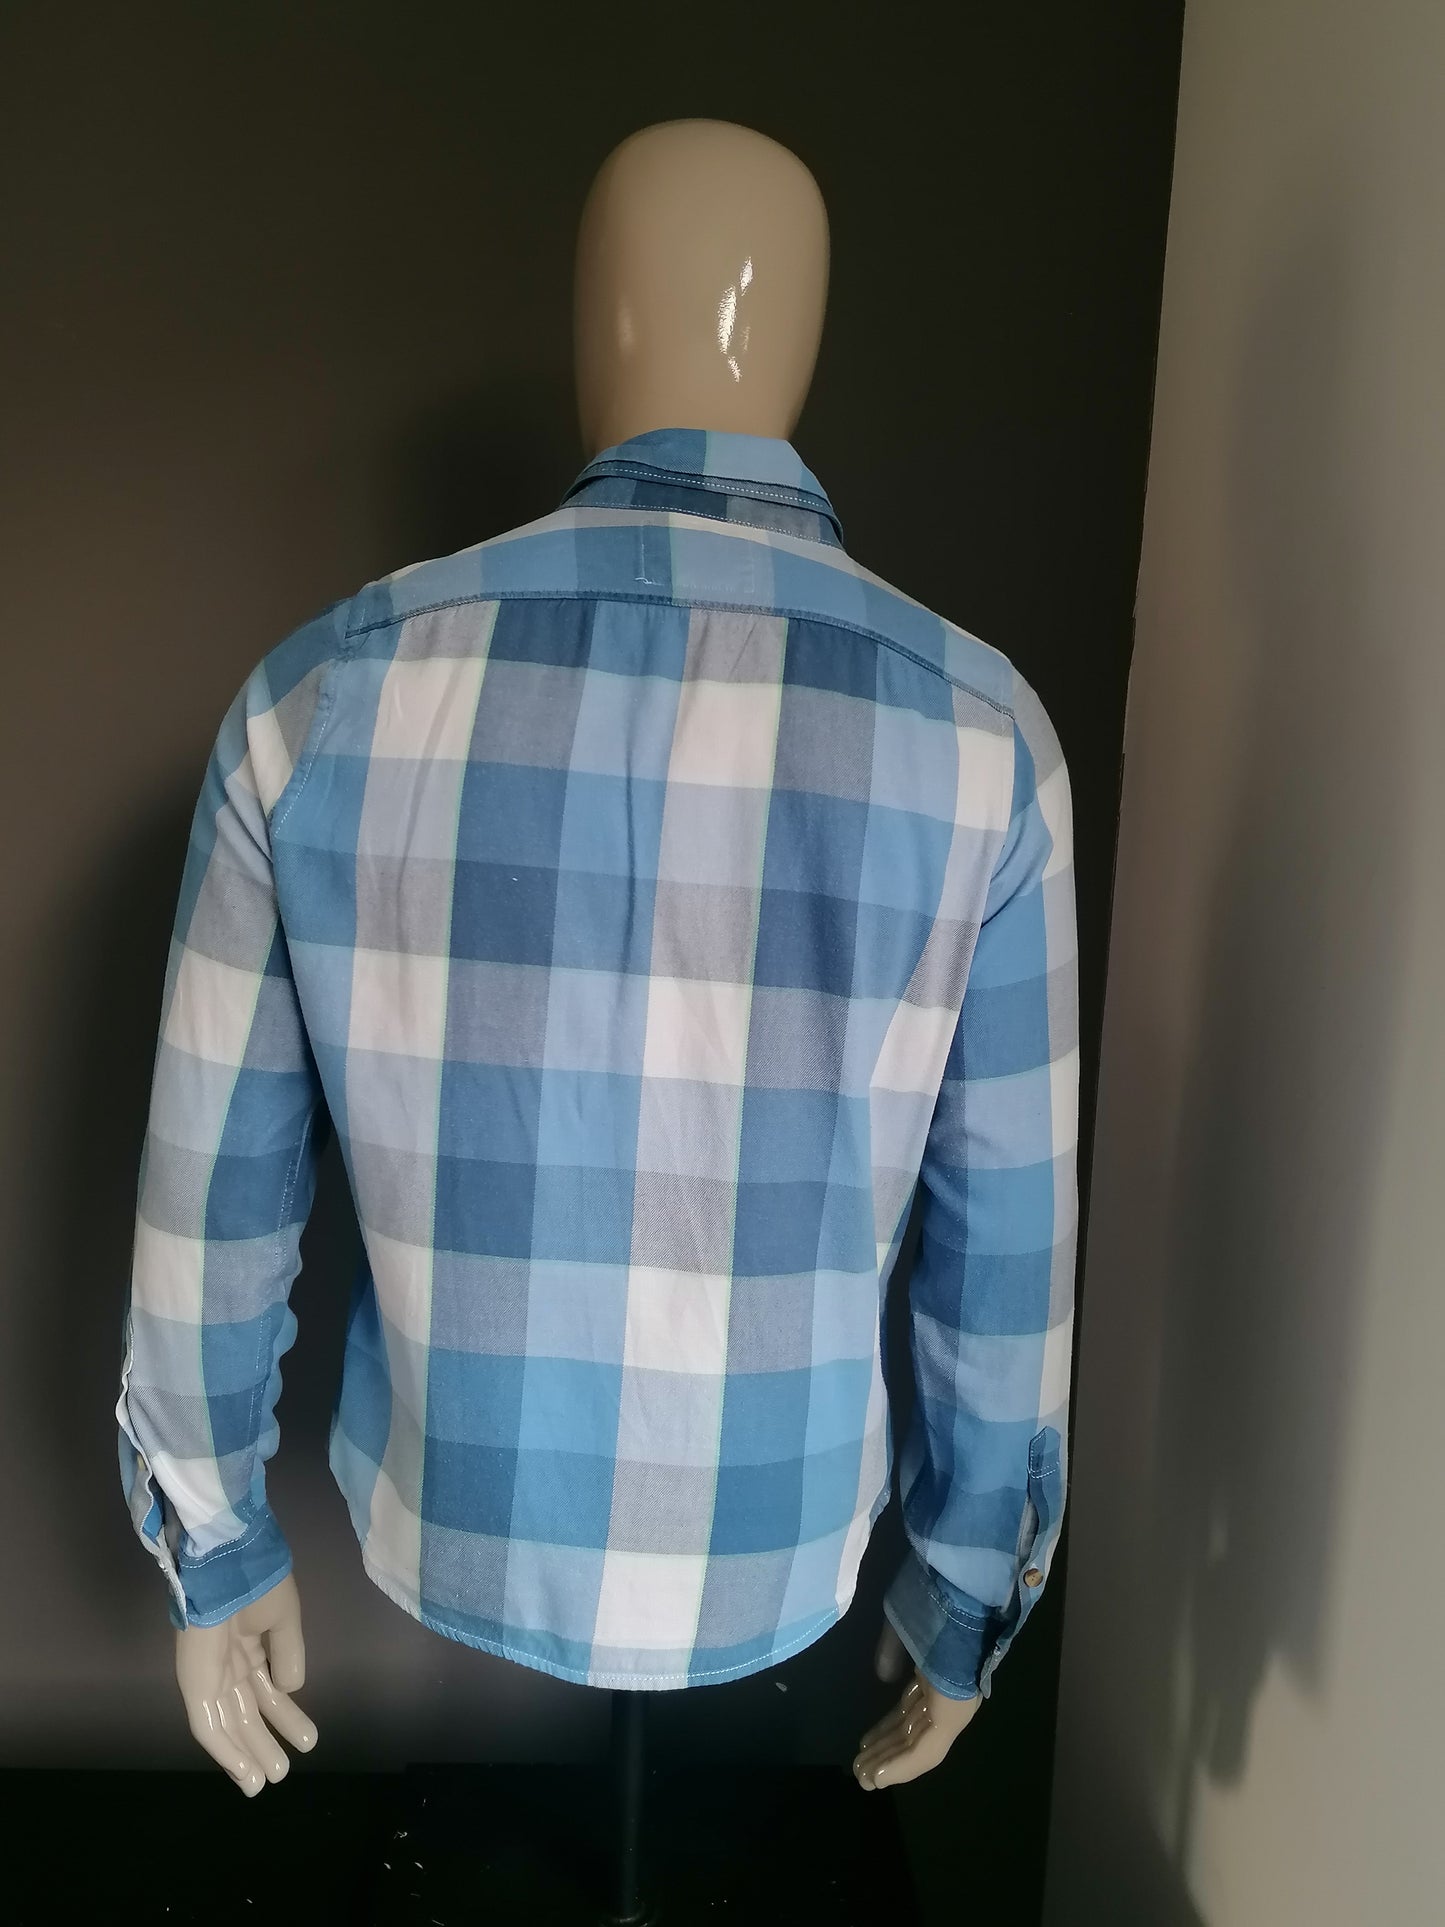 Abercrombie & Fitch flannel shirt. Block blocked. Size L. Type Muscle.